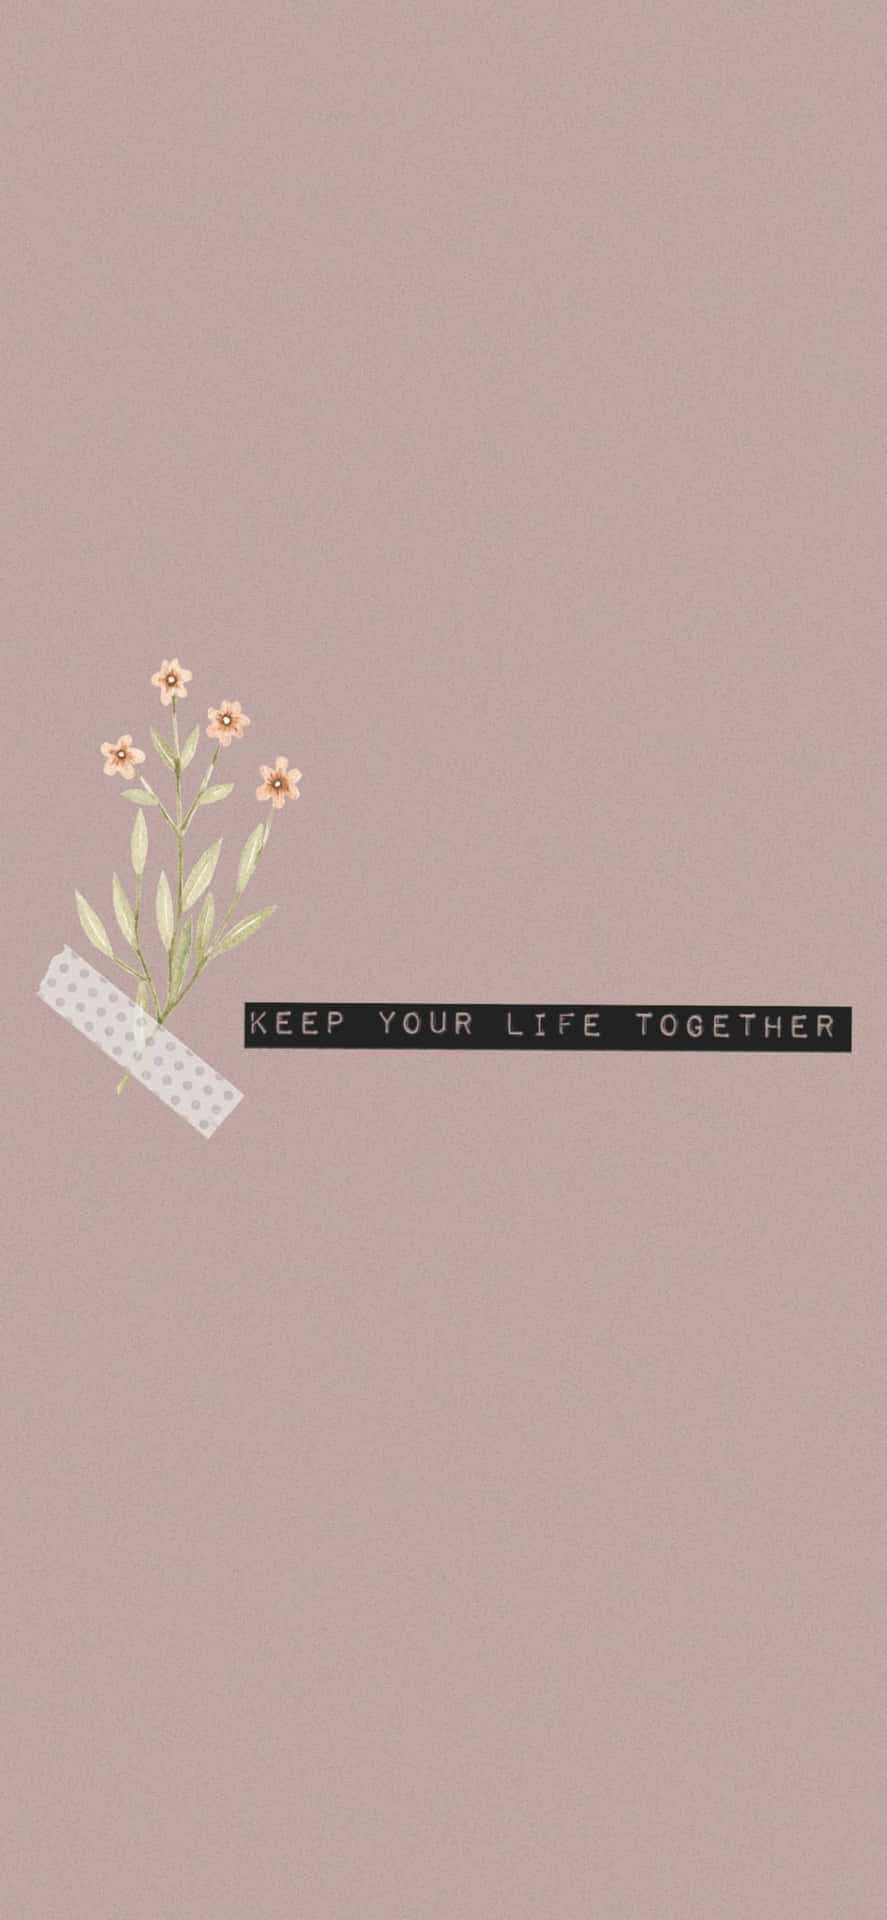 Keep Your Life Together